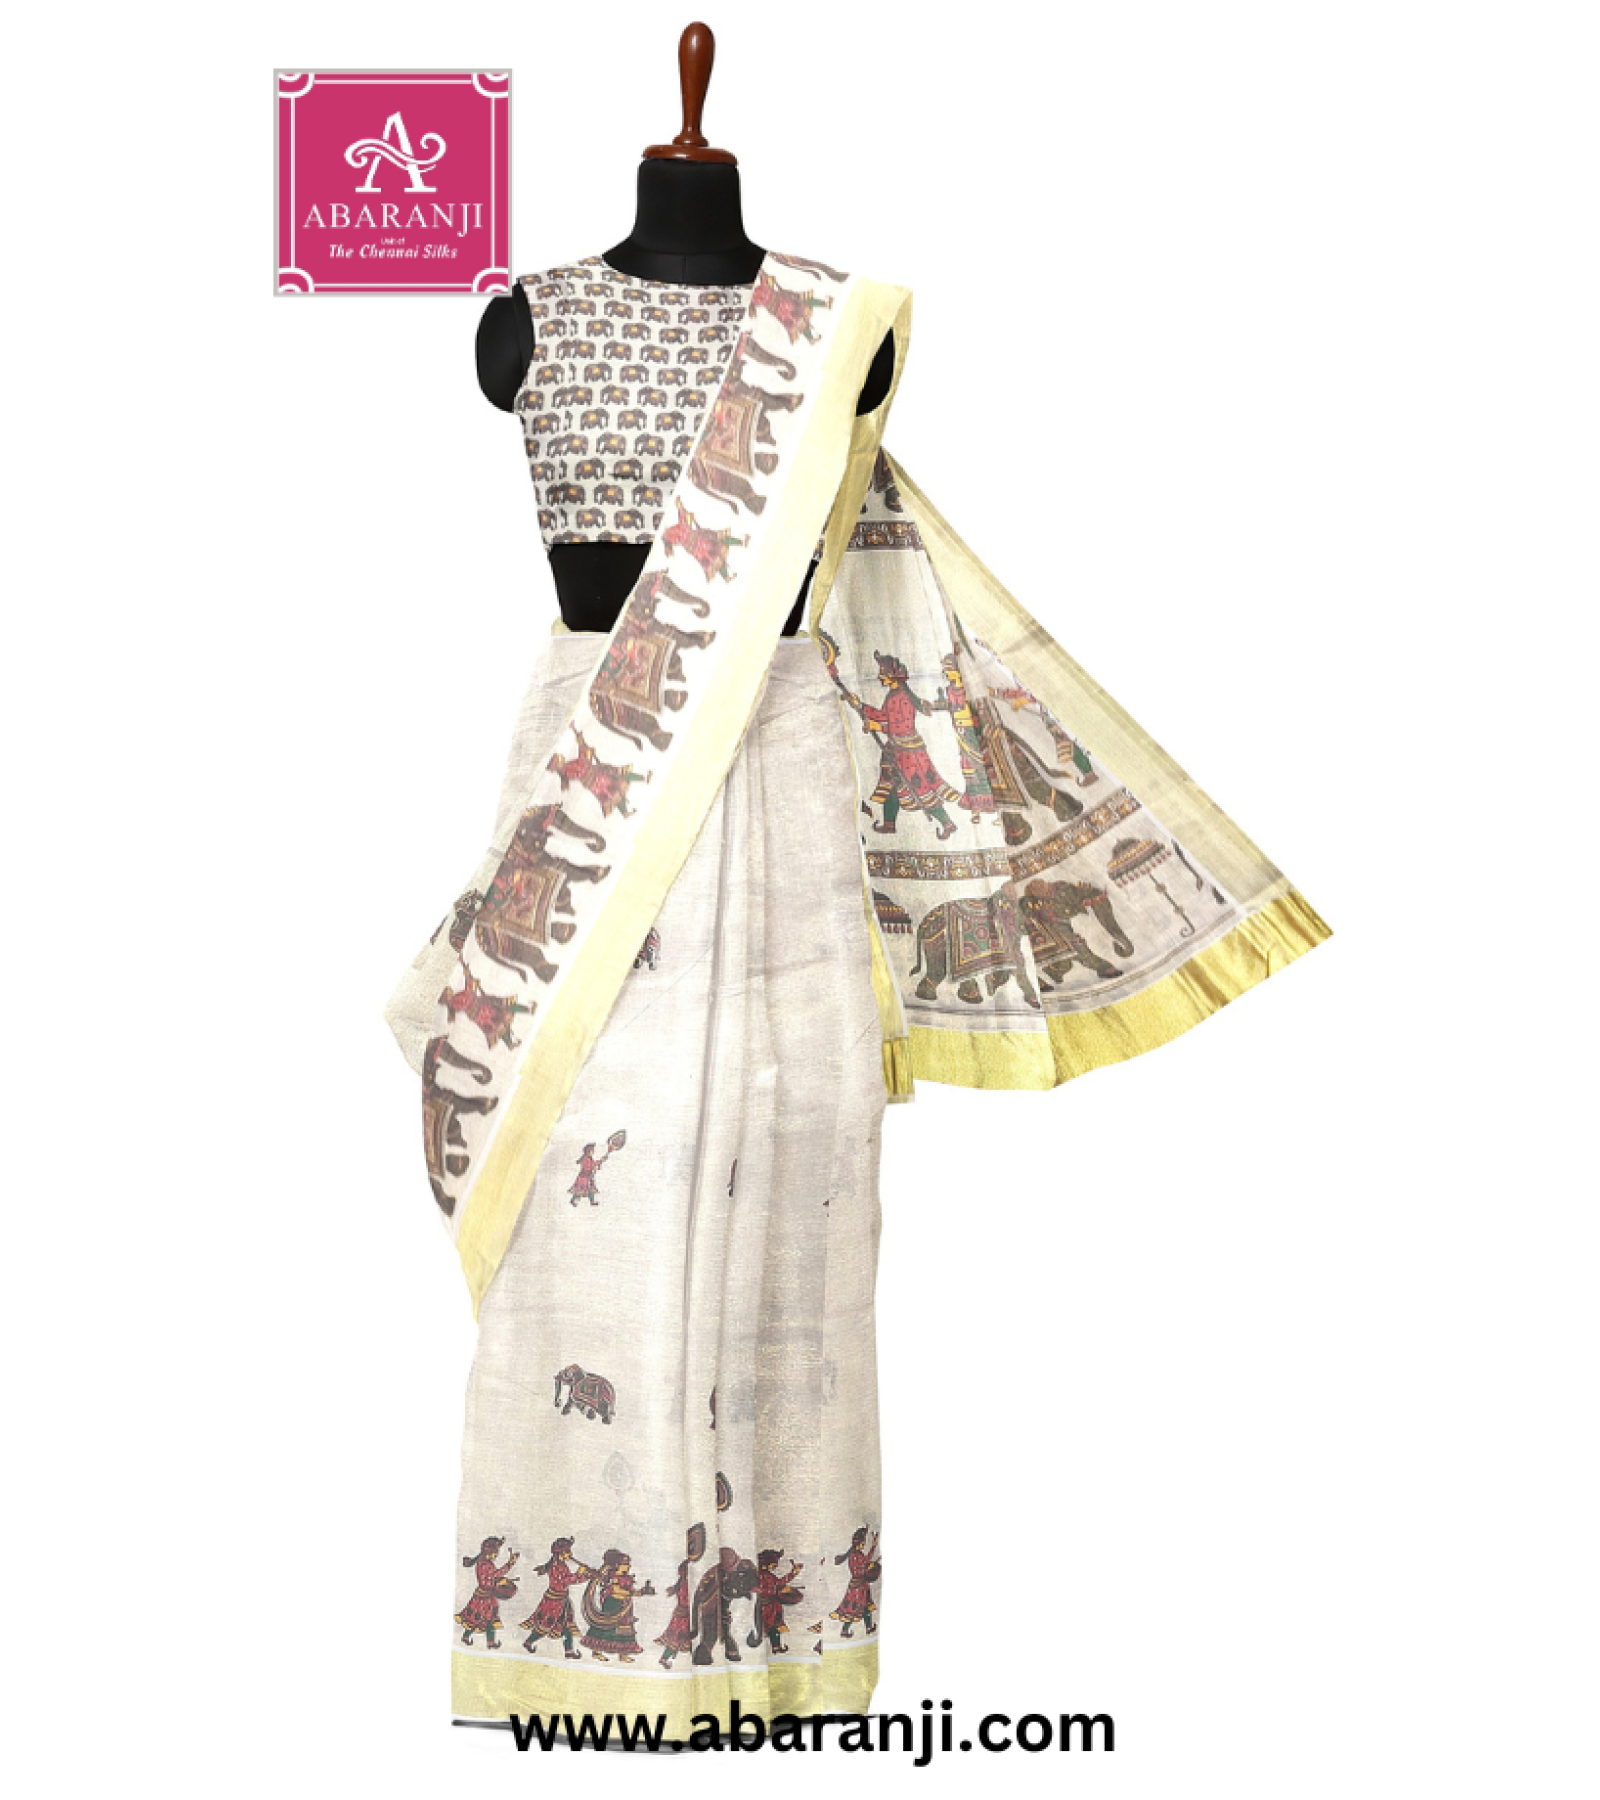 Kerala Tissue Saree With Mural Festival Parasol and Elephant Design